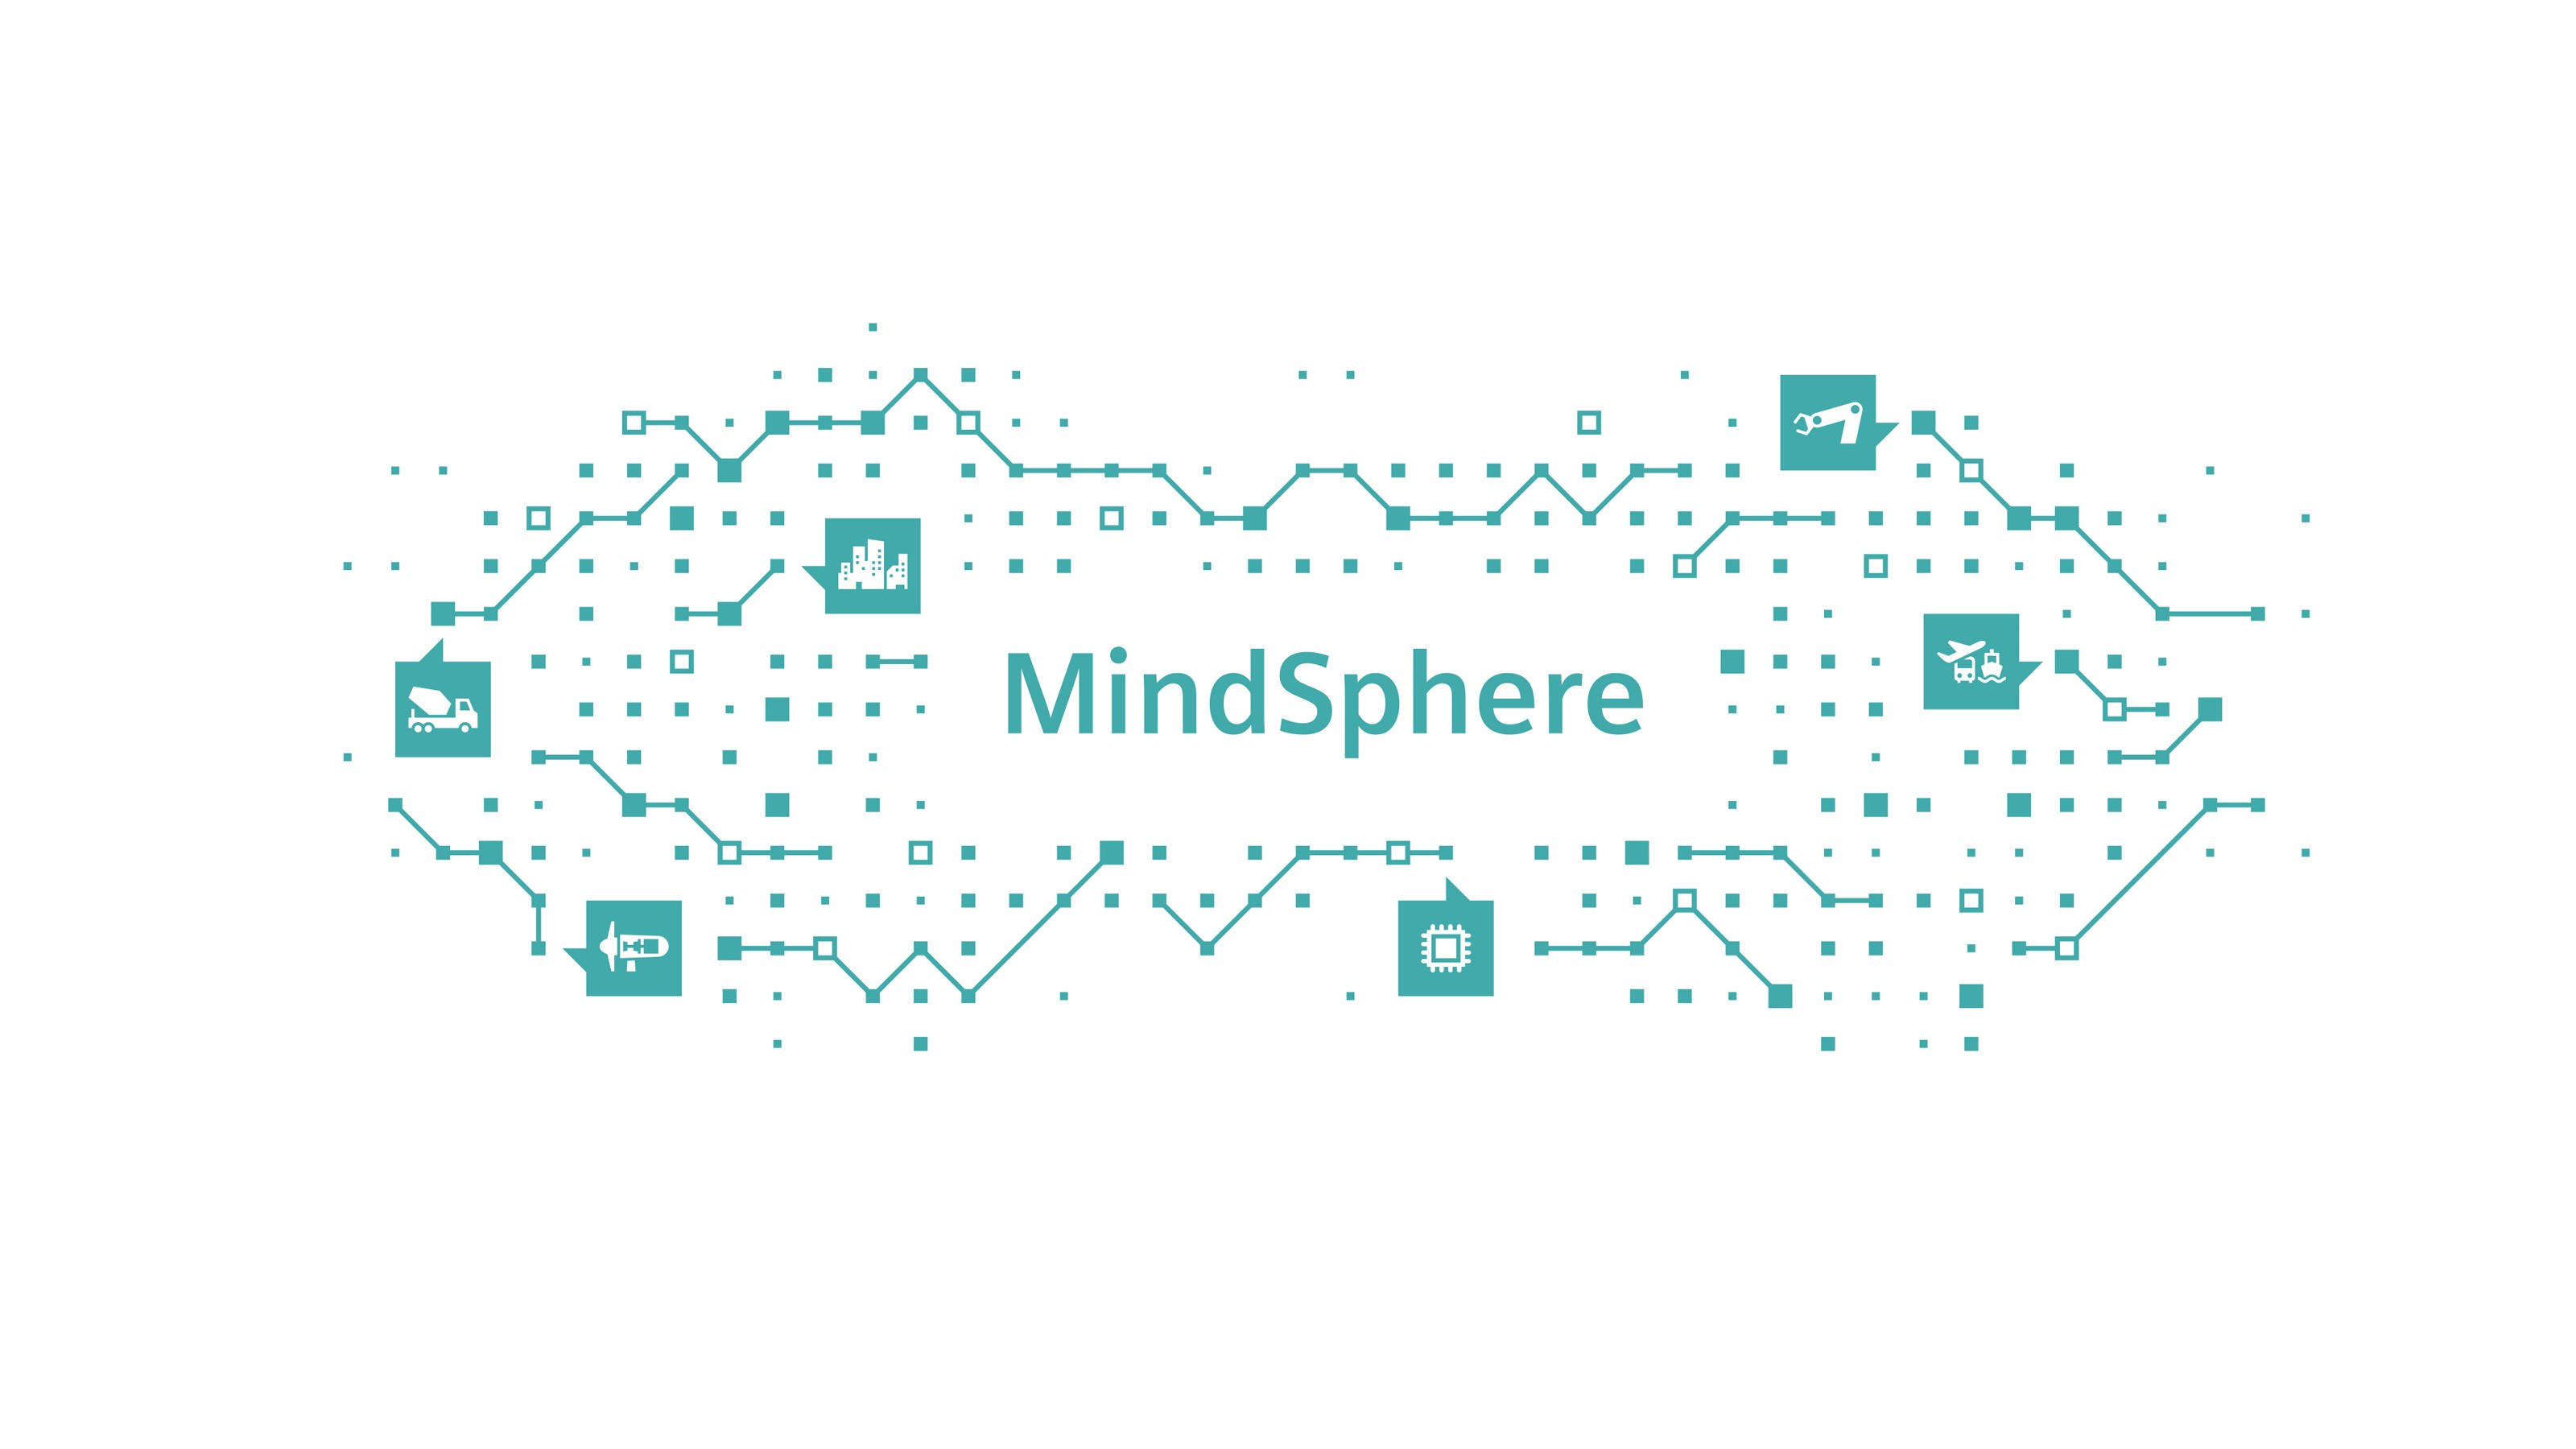 Siemens Mindsphere graphic: Rectangles connected by lines